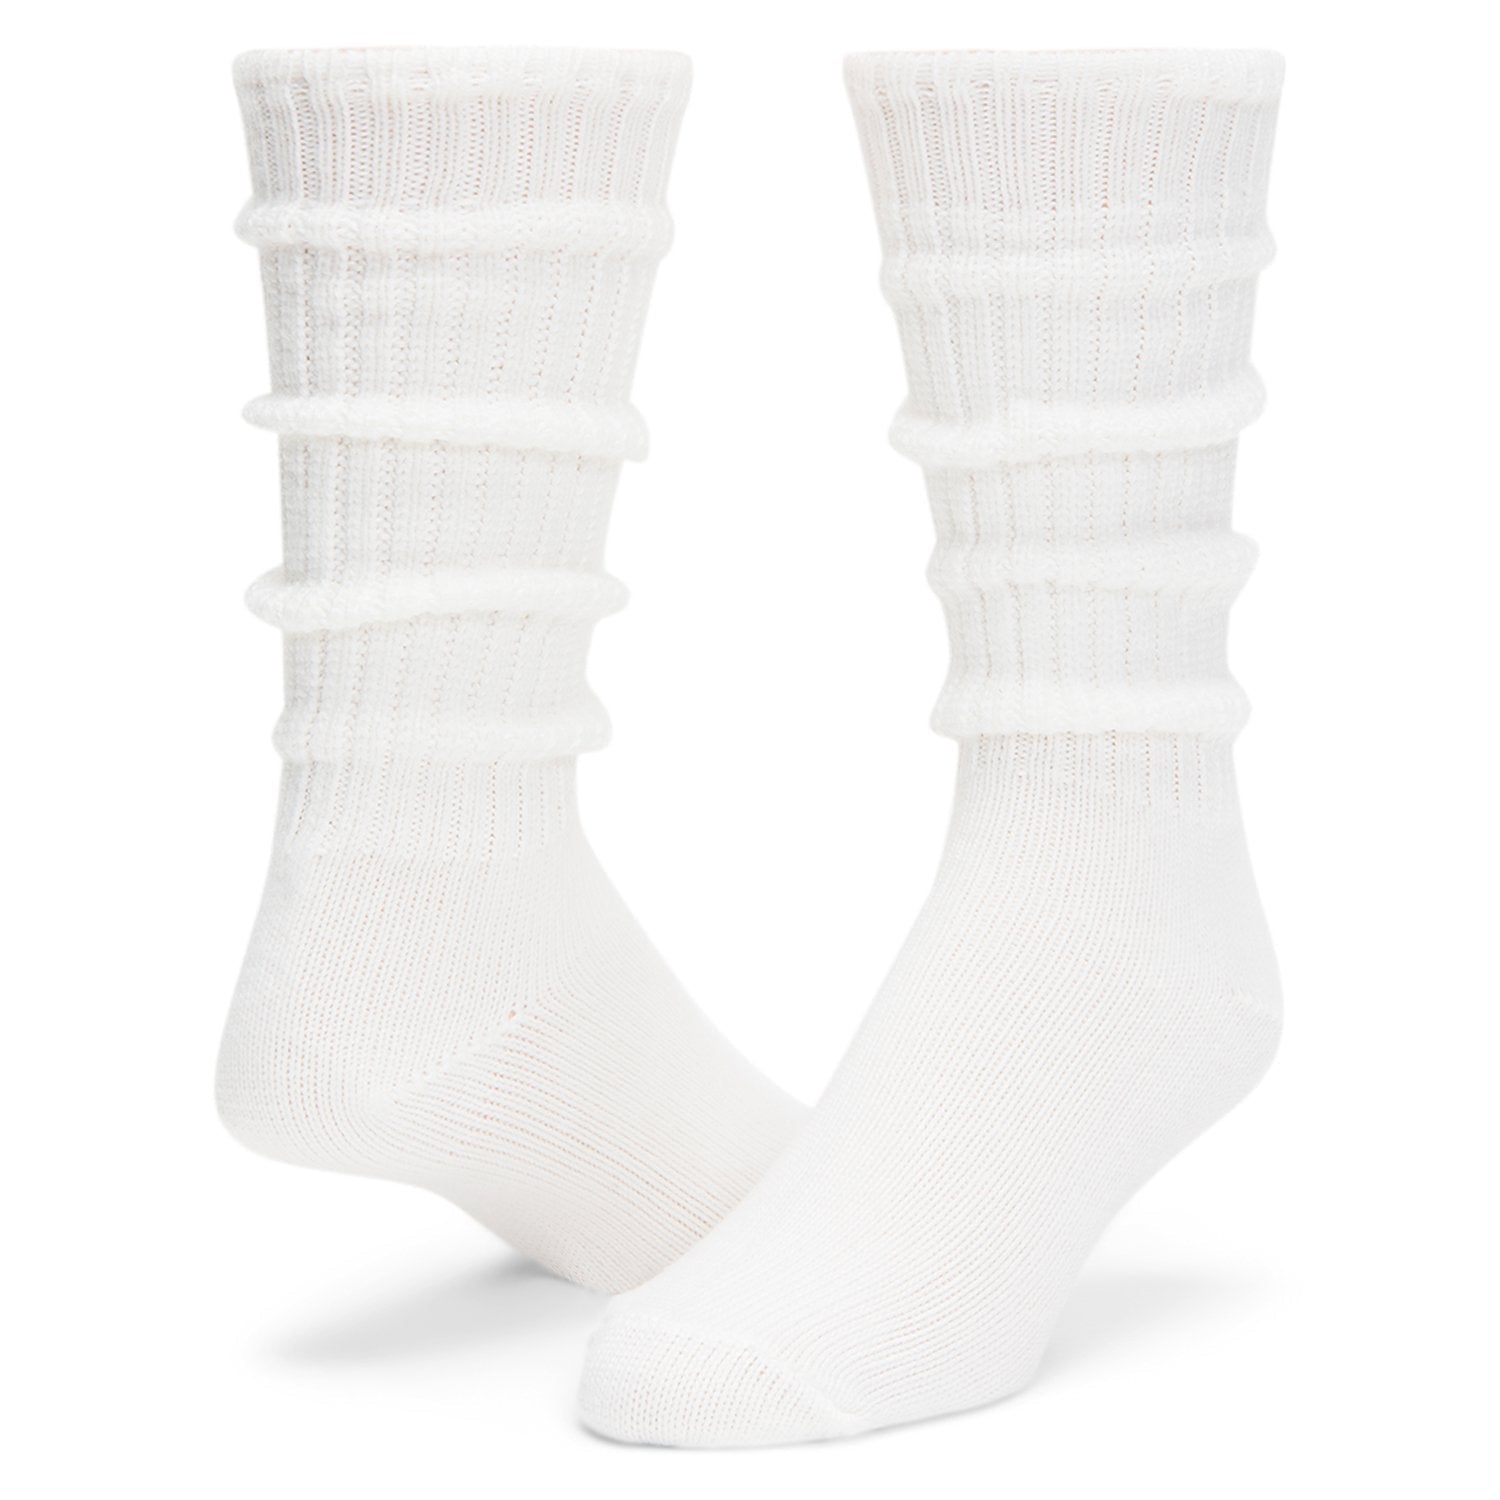 622 Sock - White full product perspective - made in The USA Wigwam Socks